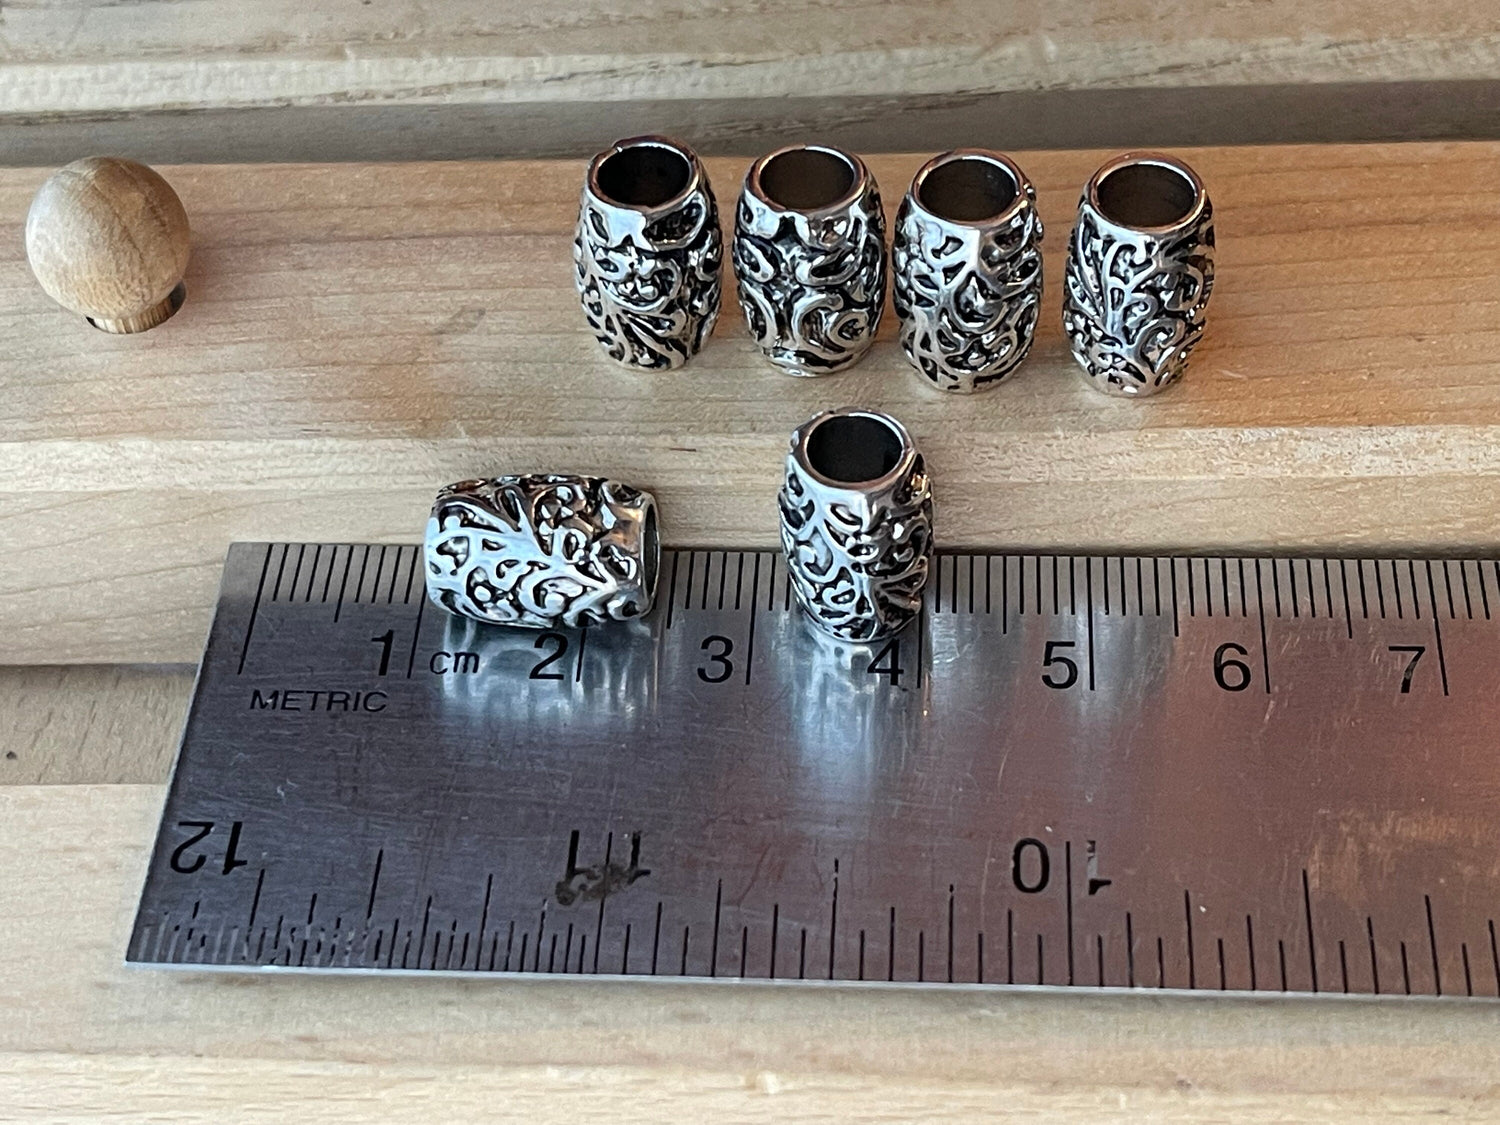 Bali Beads (BIG) baroque floral barrel design (lot of 6 or 12) – Repoussé-style jewelry supply–large 5mm hole spacer bead in antique silver